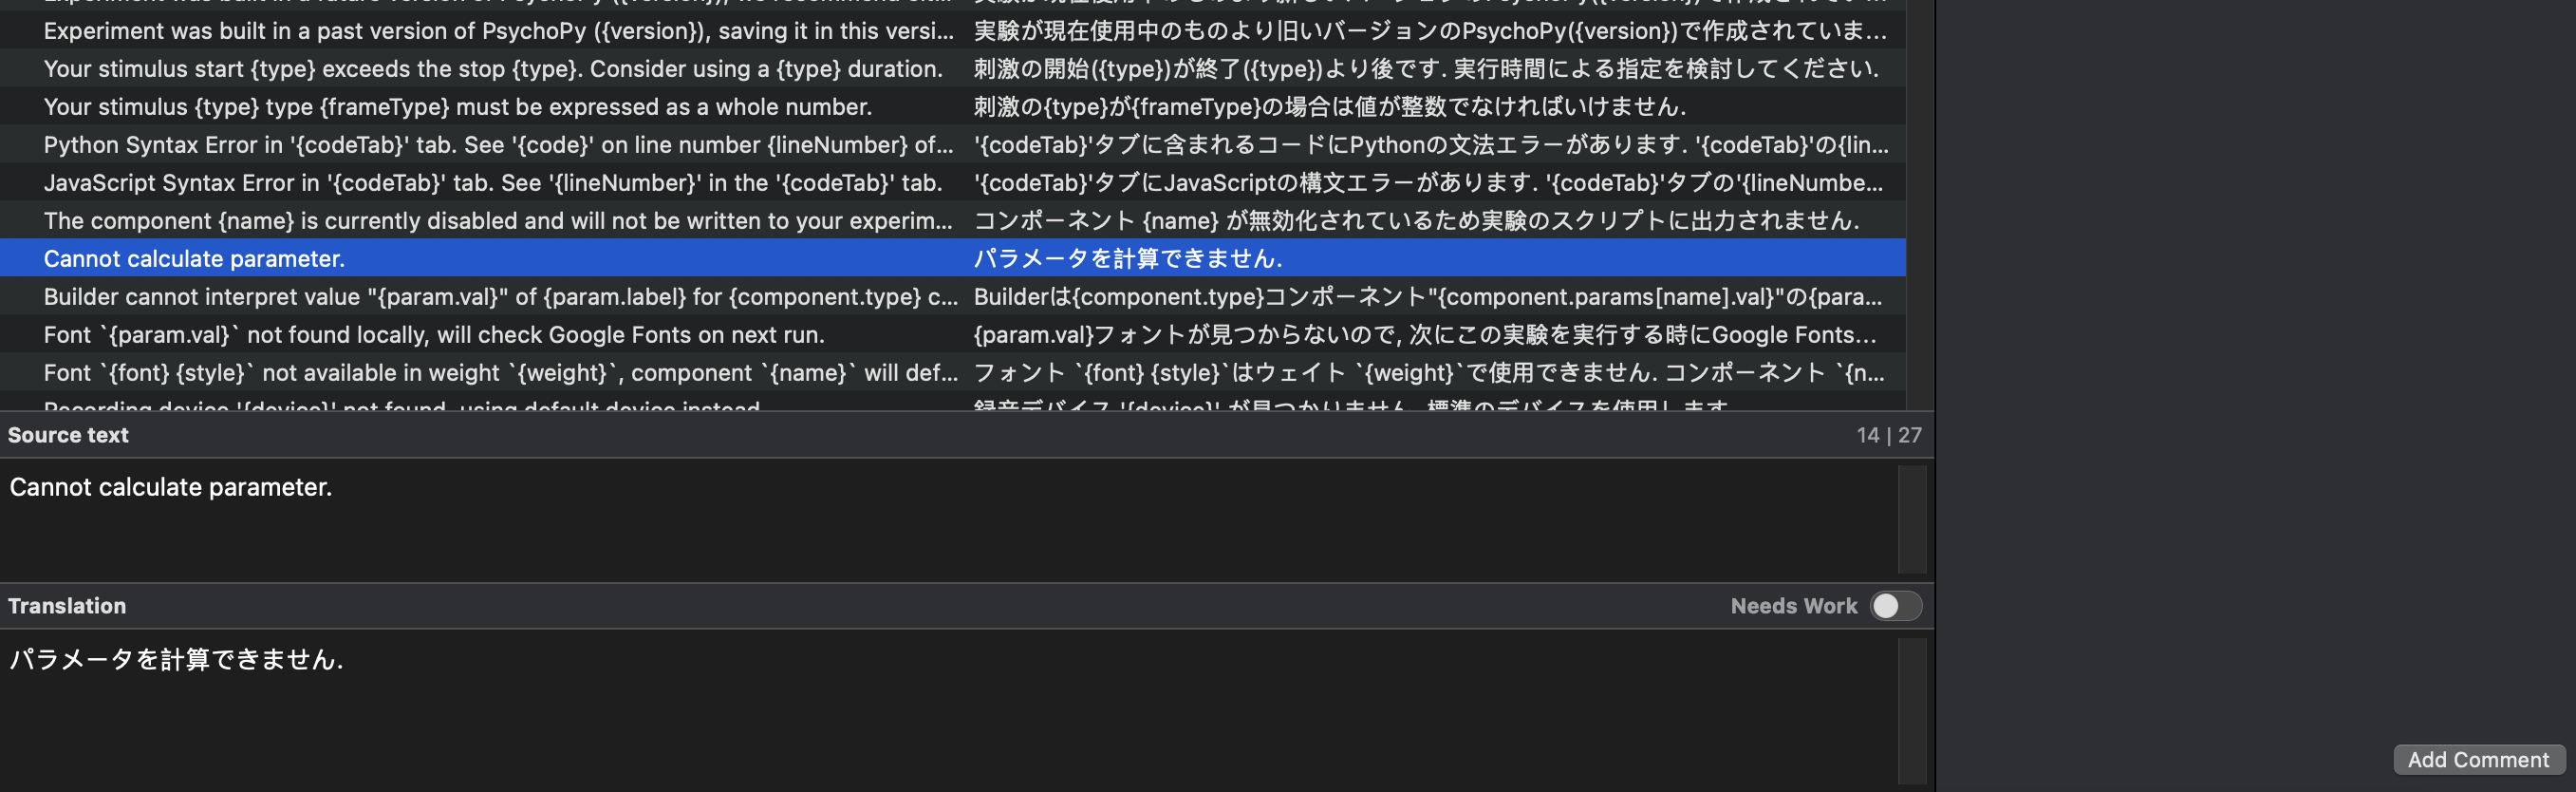 Screenshot of translated strings that appear after the translator adds translations. The example is from Japanese. The highlighted source text is the PsychoPy string "Cannot calculate parameter," with the Japanese translation to the right of it.